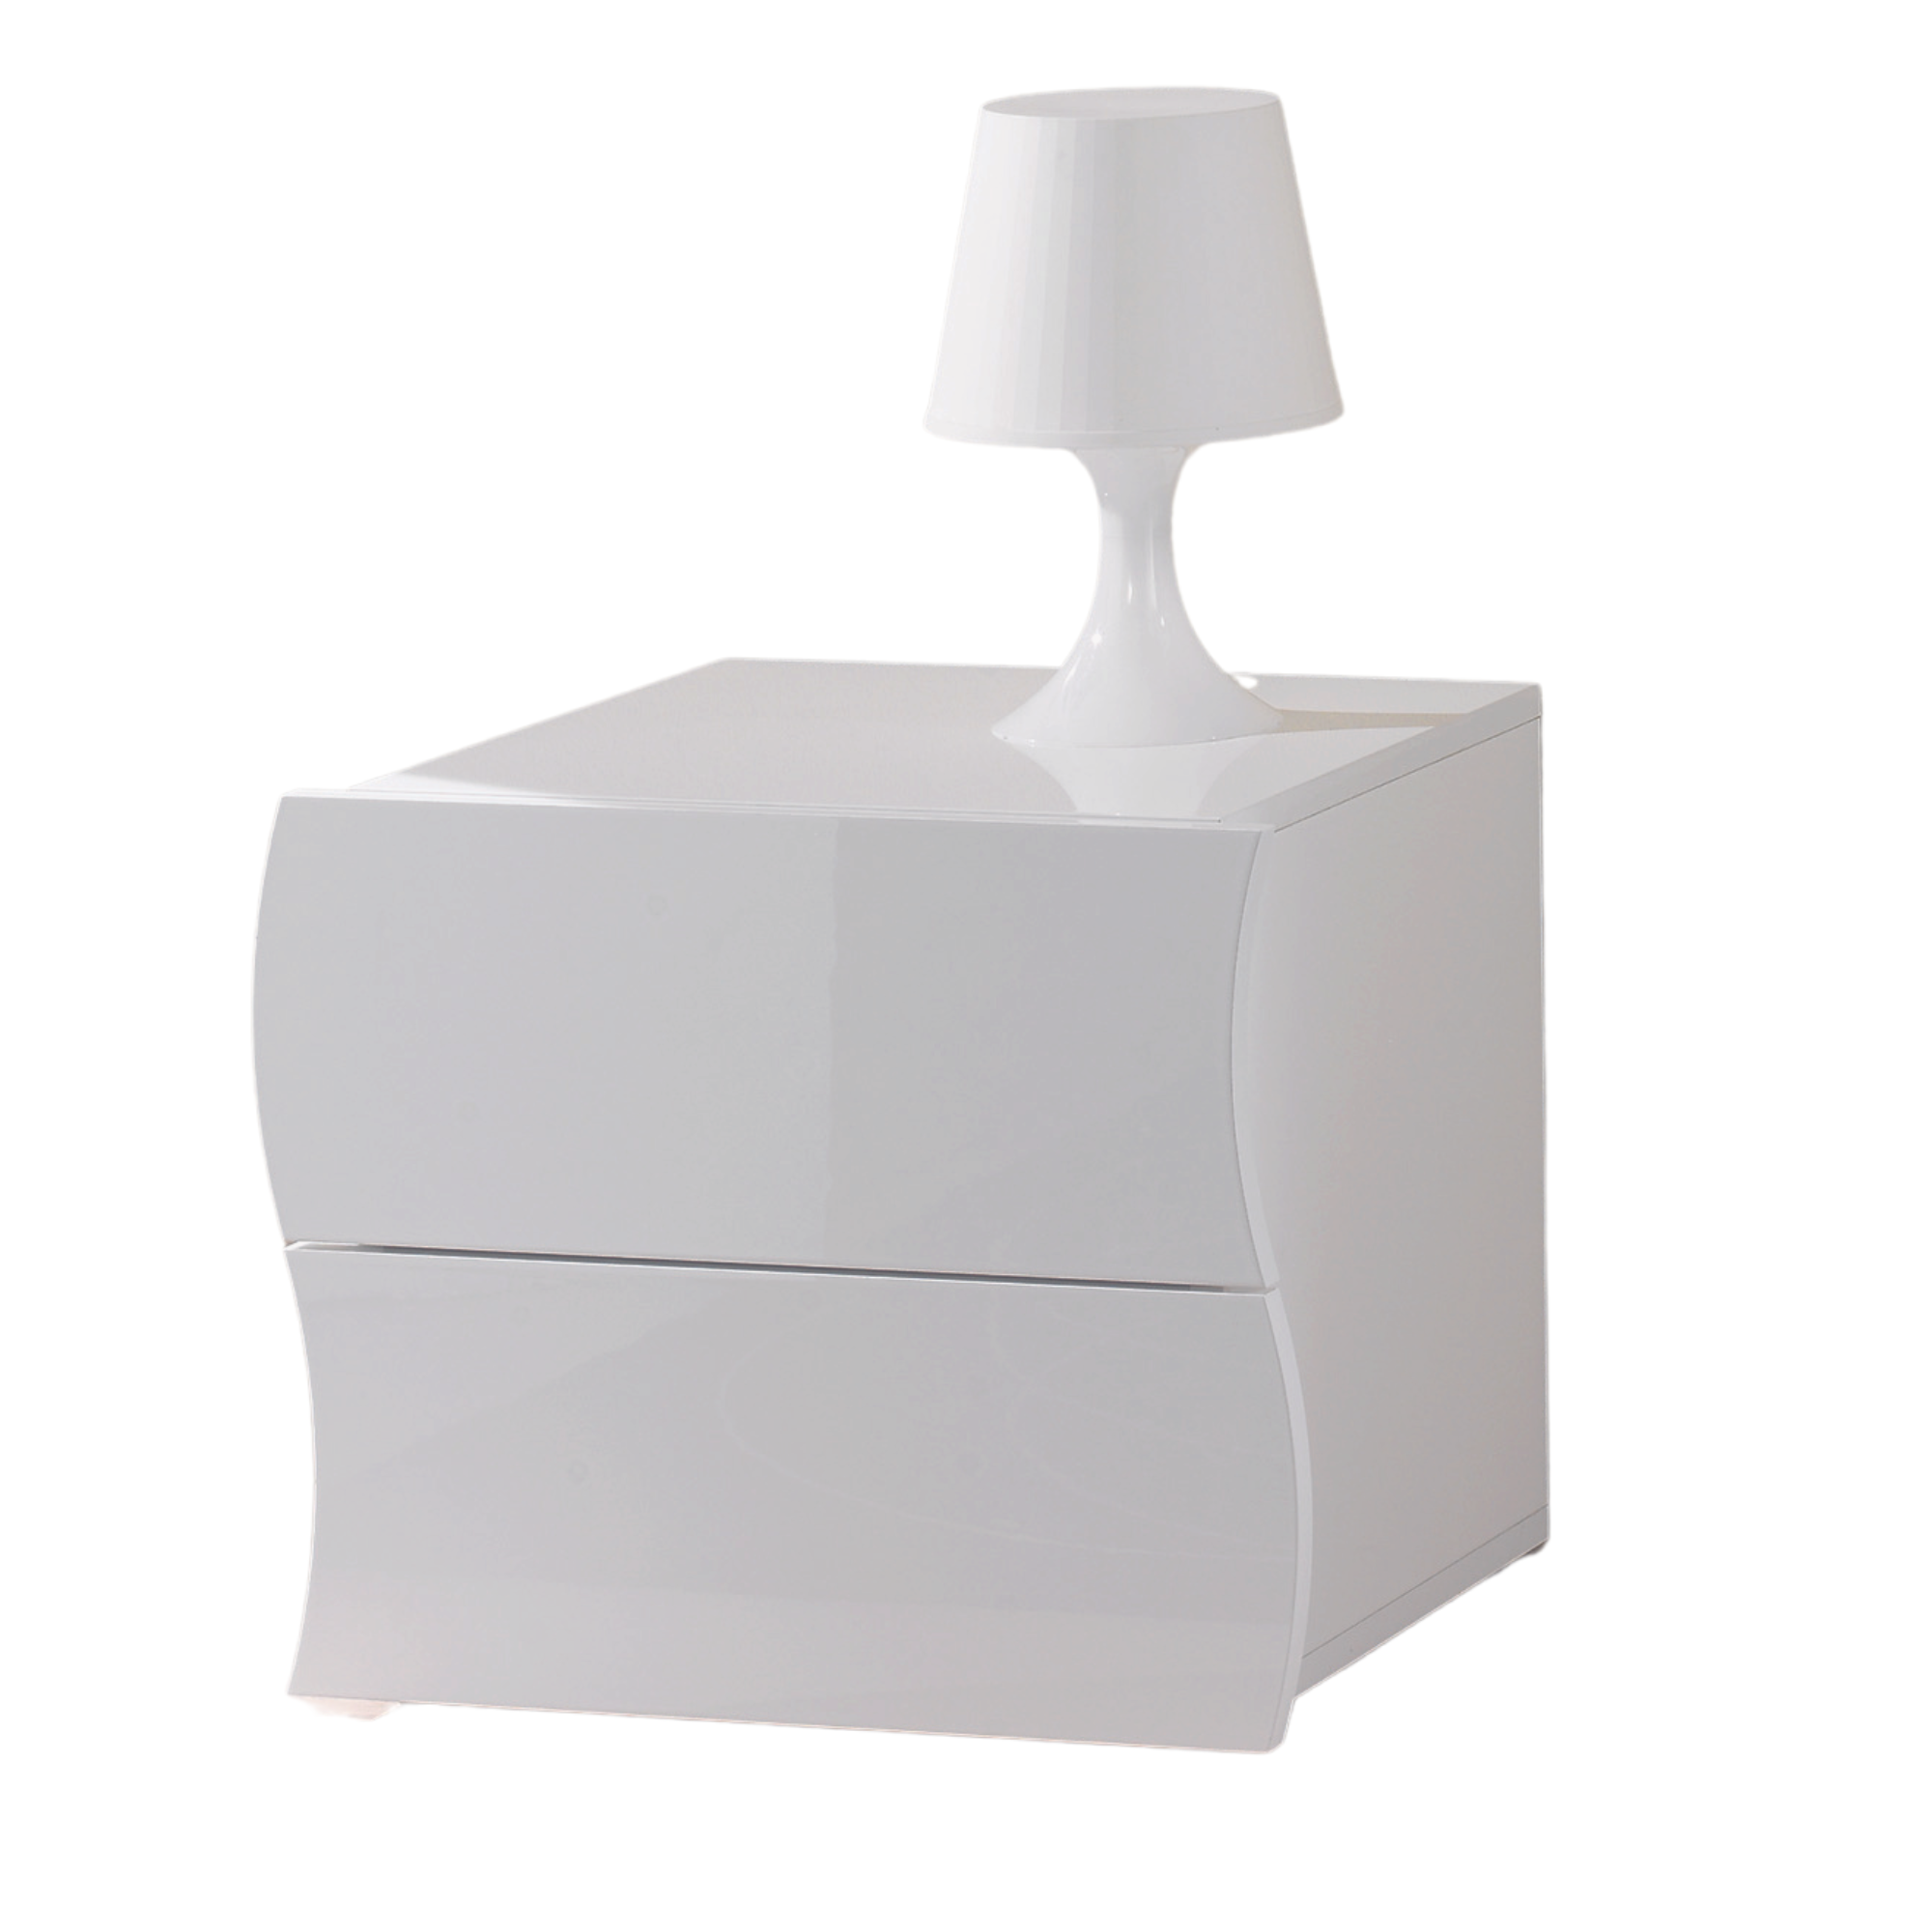 Onda Modern Glossy White Nightstand with Two Spacious Drawers - Furniture.Agency